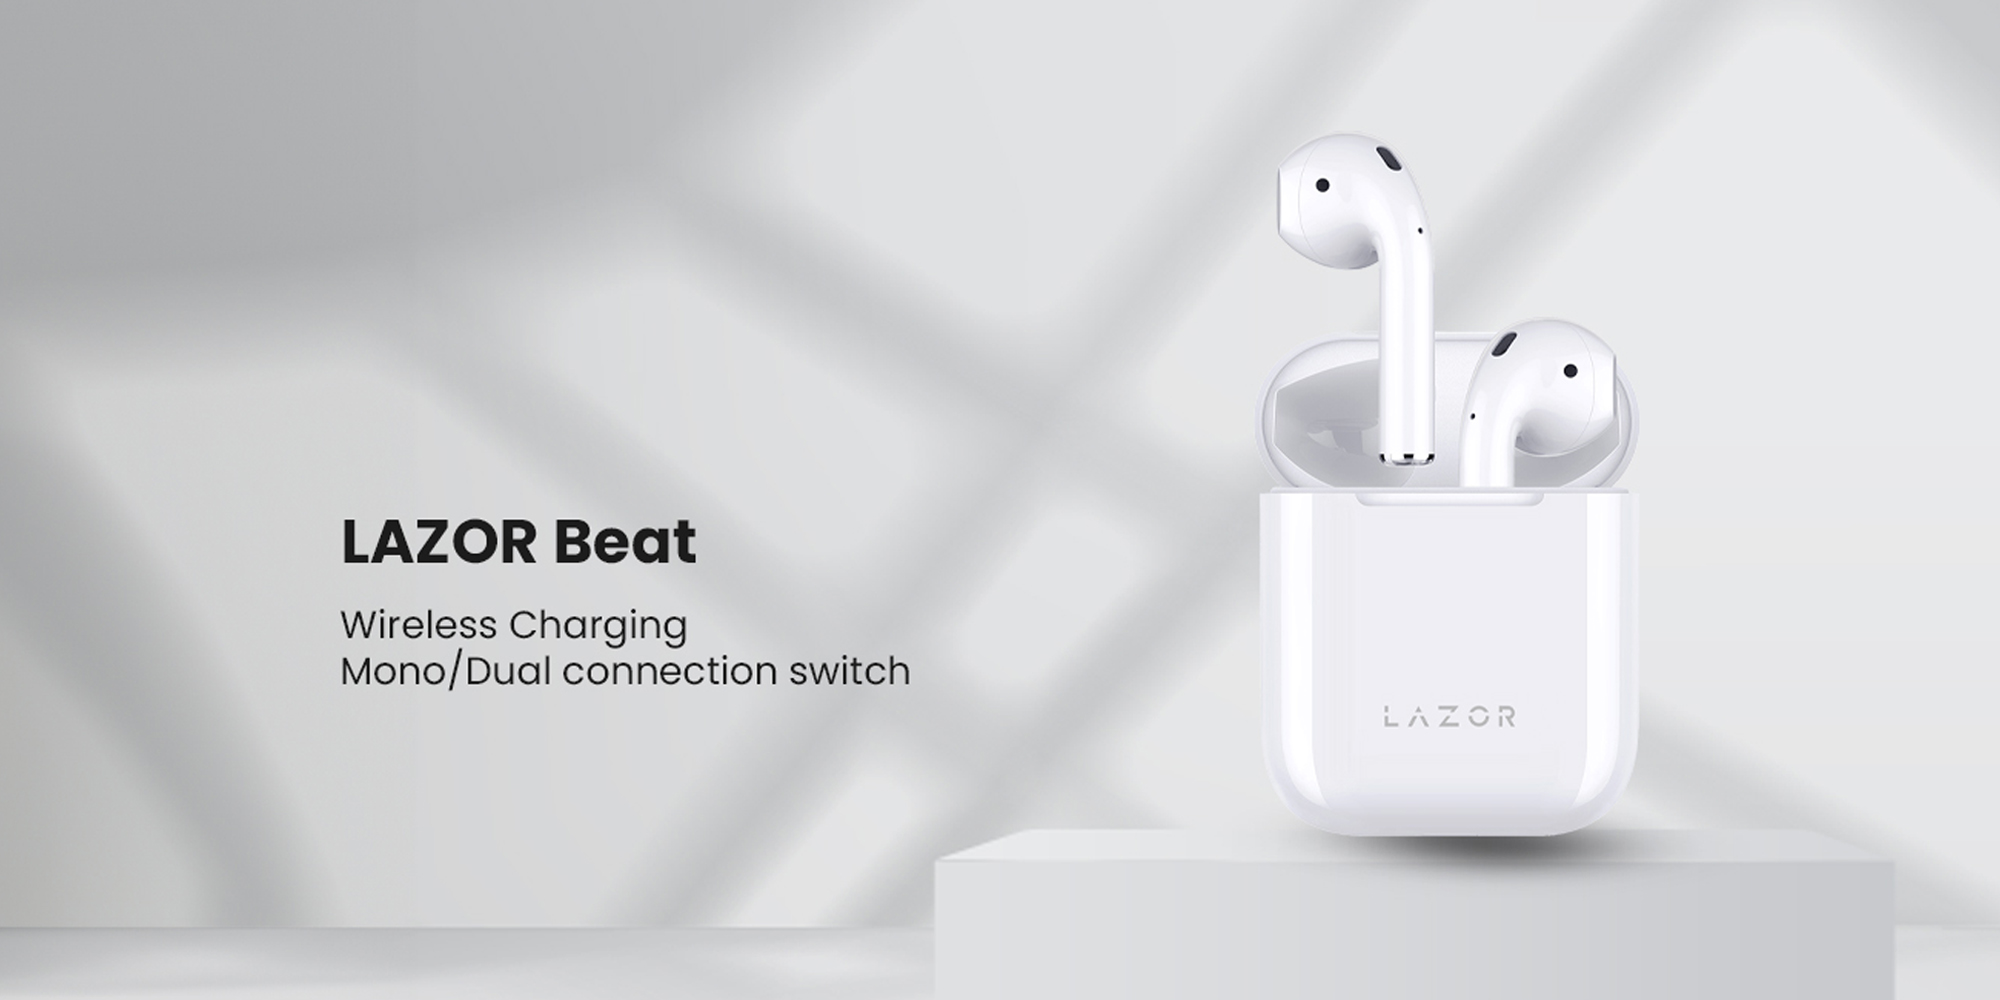 Lazor Beat EA78 TWS Earphones: Mono/Stereo Switch Sound Quality, Touch Control, BT V5.0, Pop-up Notification, Wireless Charging - White